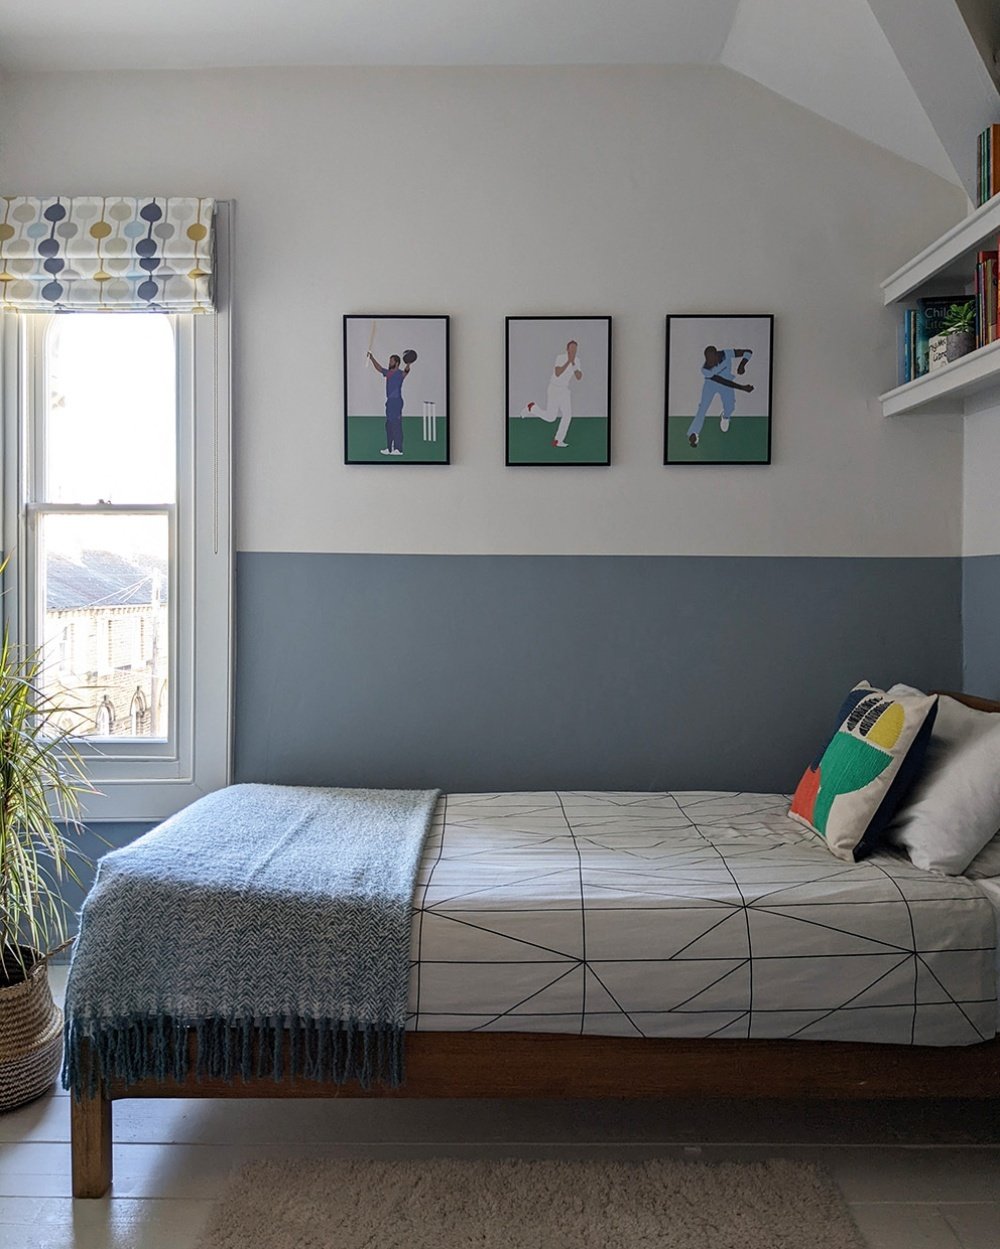 I've shared two final reveal blog posts this week - the master bedroom and teen boys' bedrooms  at my Saltaire Victorian terrace project. The clients often visit Sweden and love all things Scandinavian so we kept to neutral tones, subtly highlighting